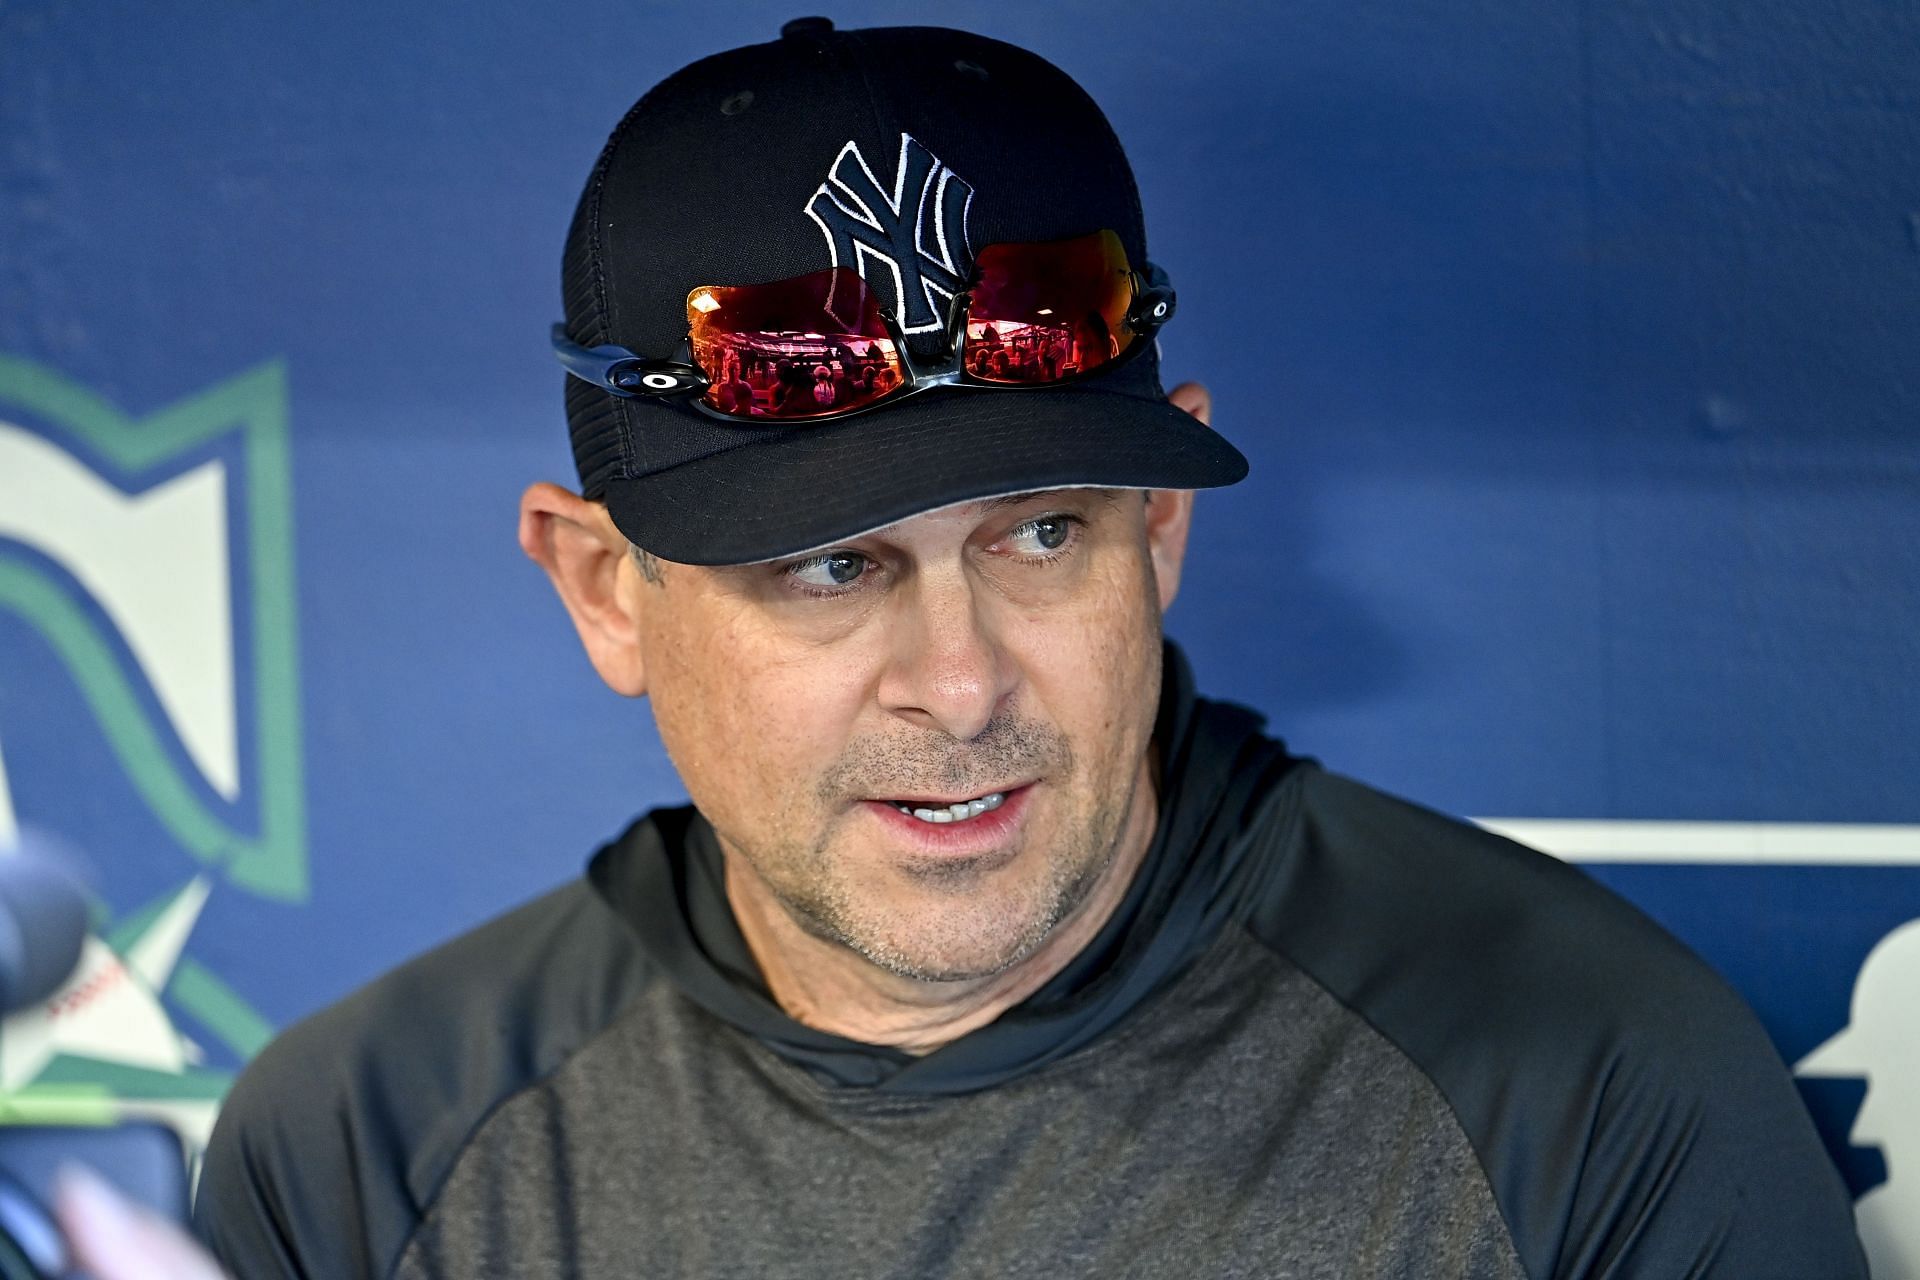 WATCH: Yankees manager Aaron Boone crushes home run on 50th birthday